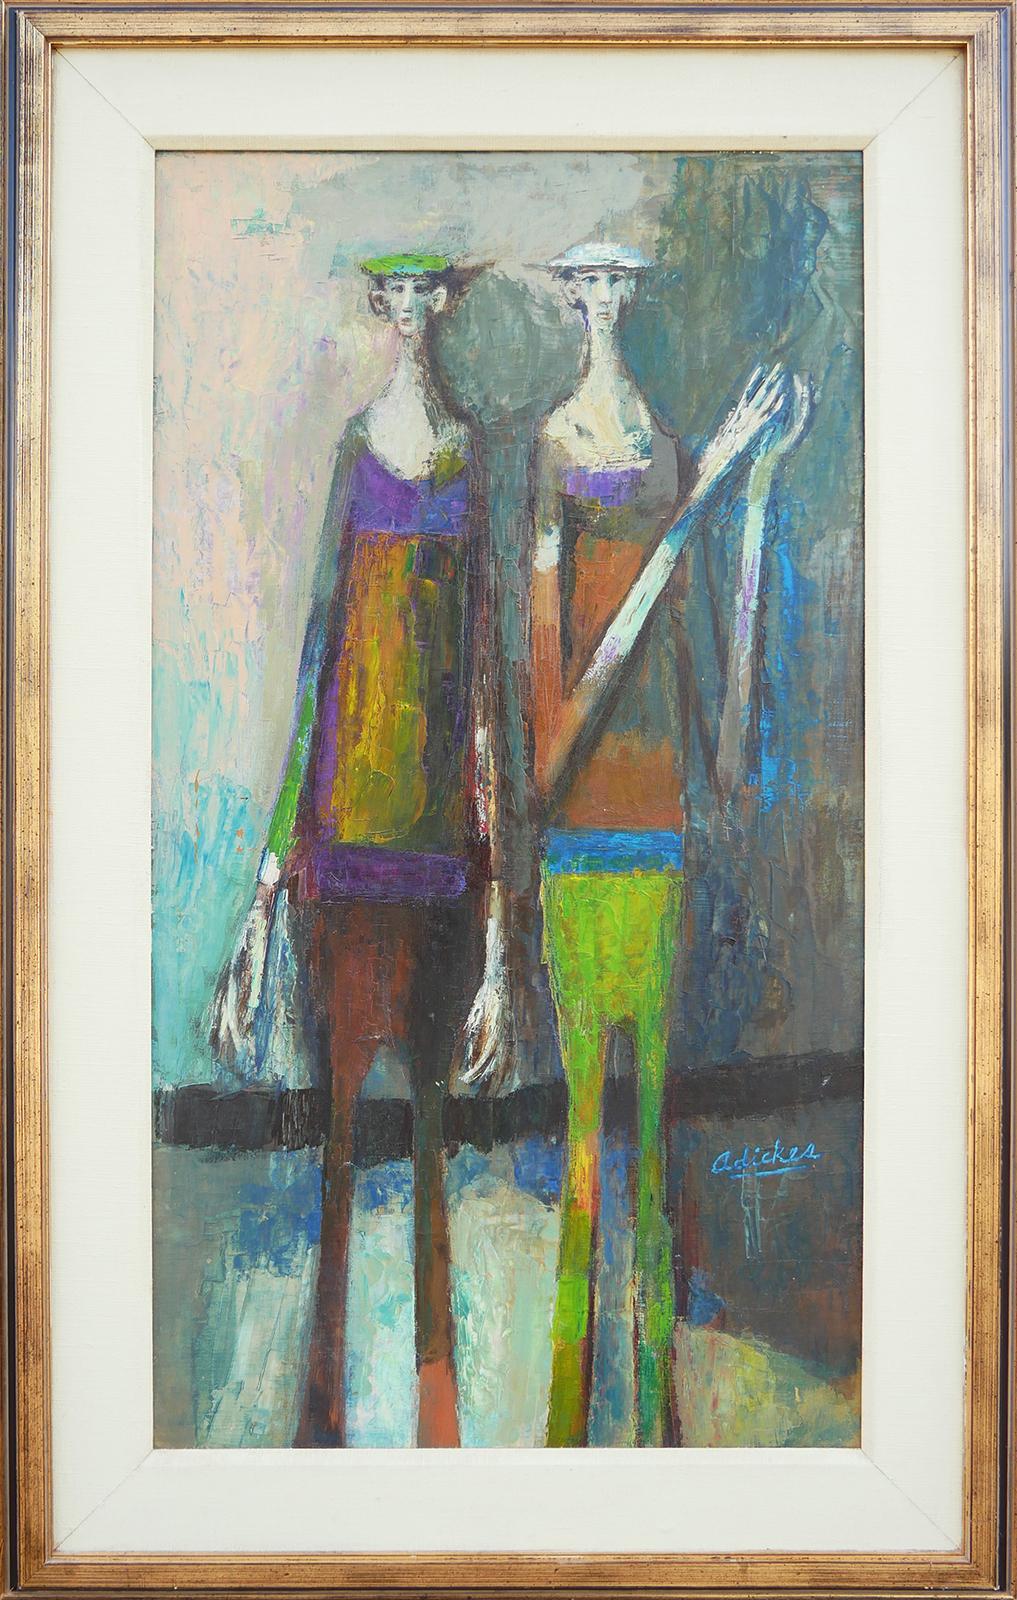 David Adickes Abstract Painting - "Deux Harlequins" Abstract Figurative Portrait Painting 